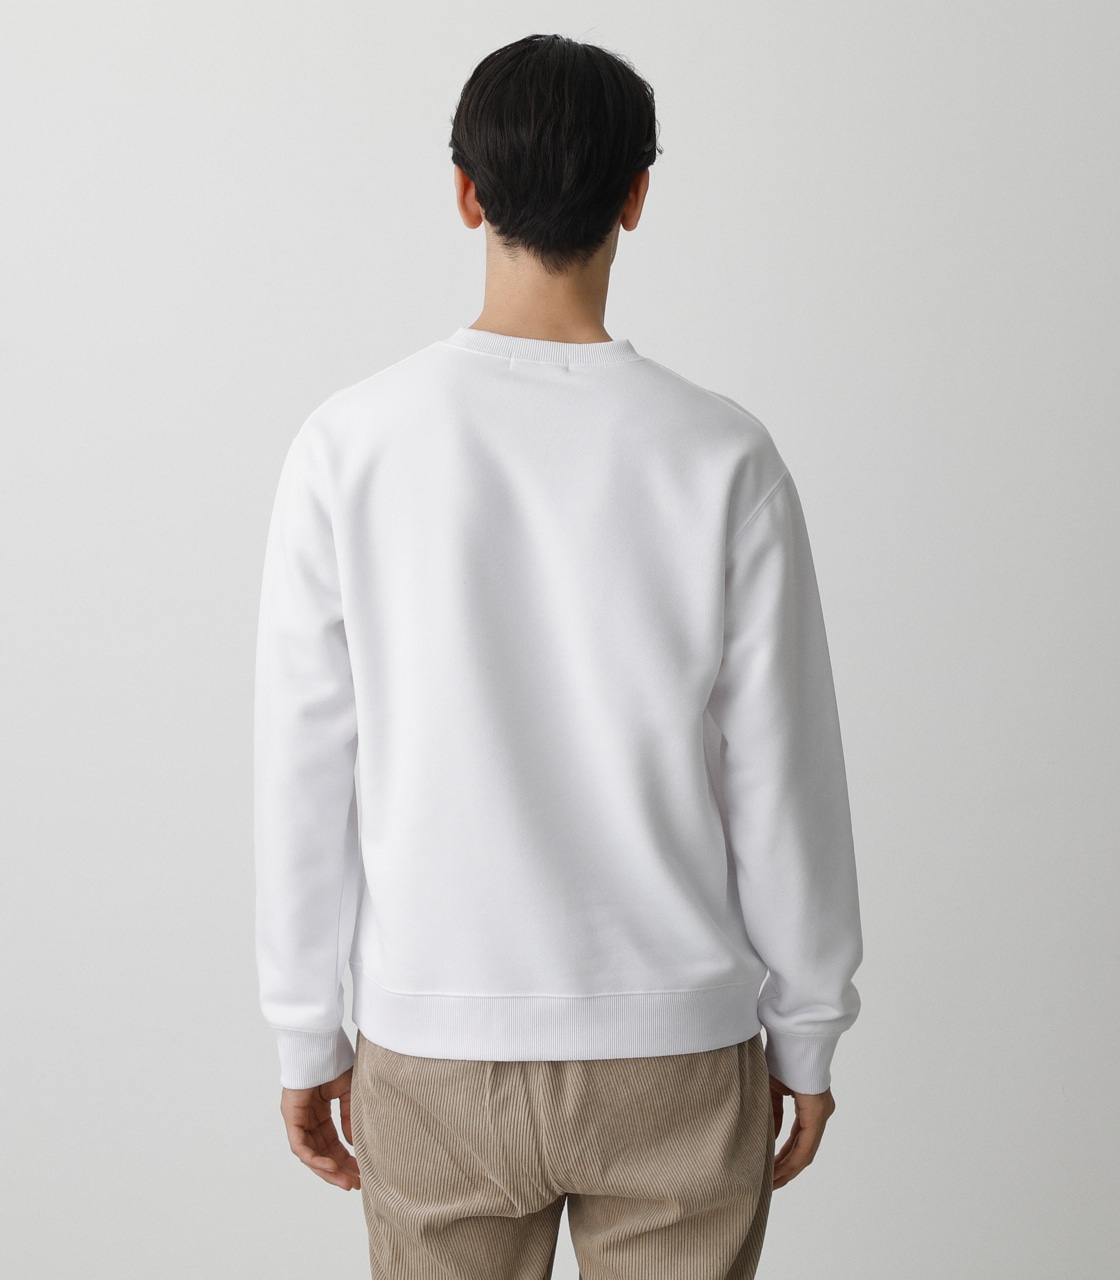 BRUSHED BACK COLOR TOPS/ブラッシュドバックカラートップス 詳細画像 WHT 7